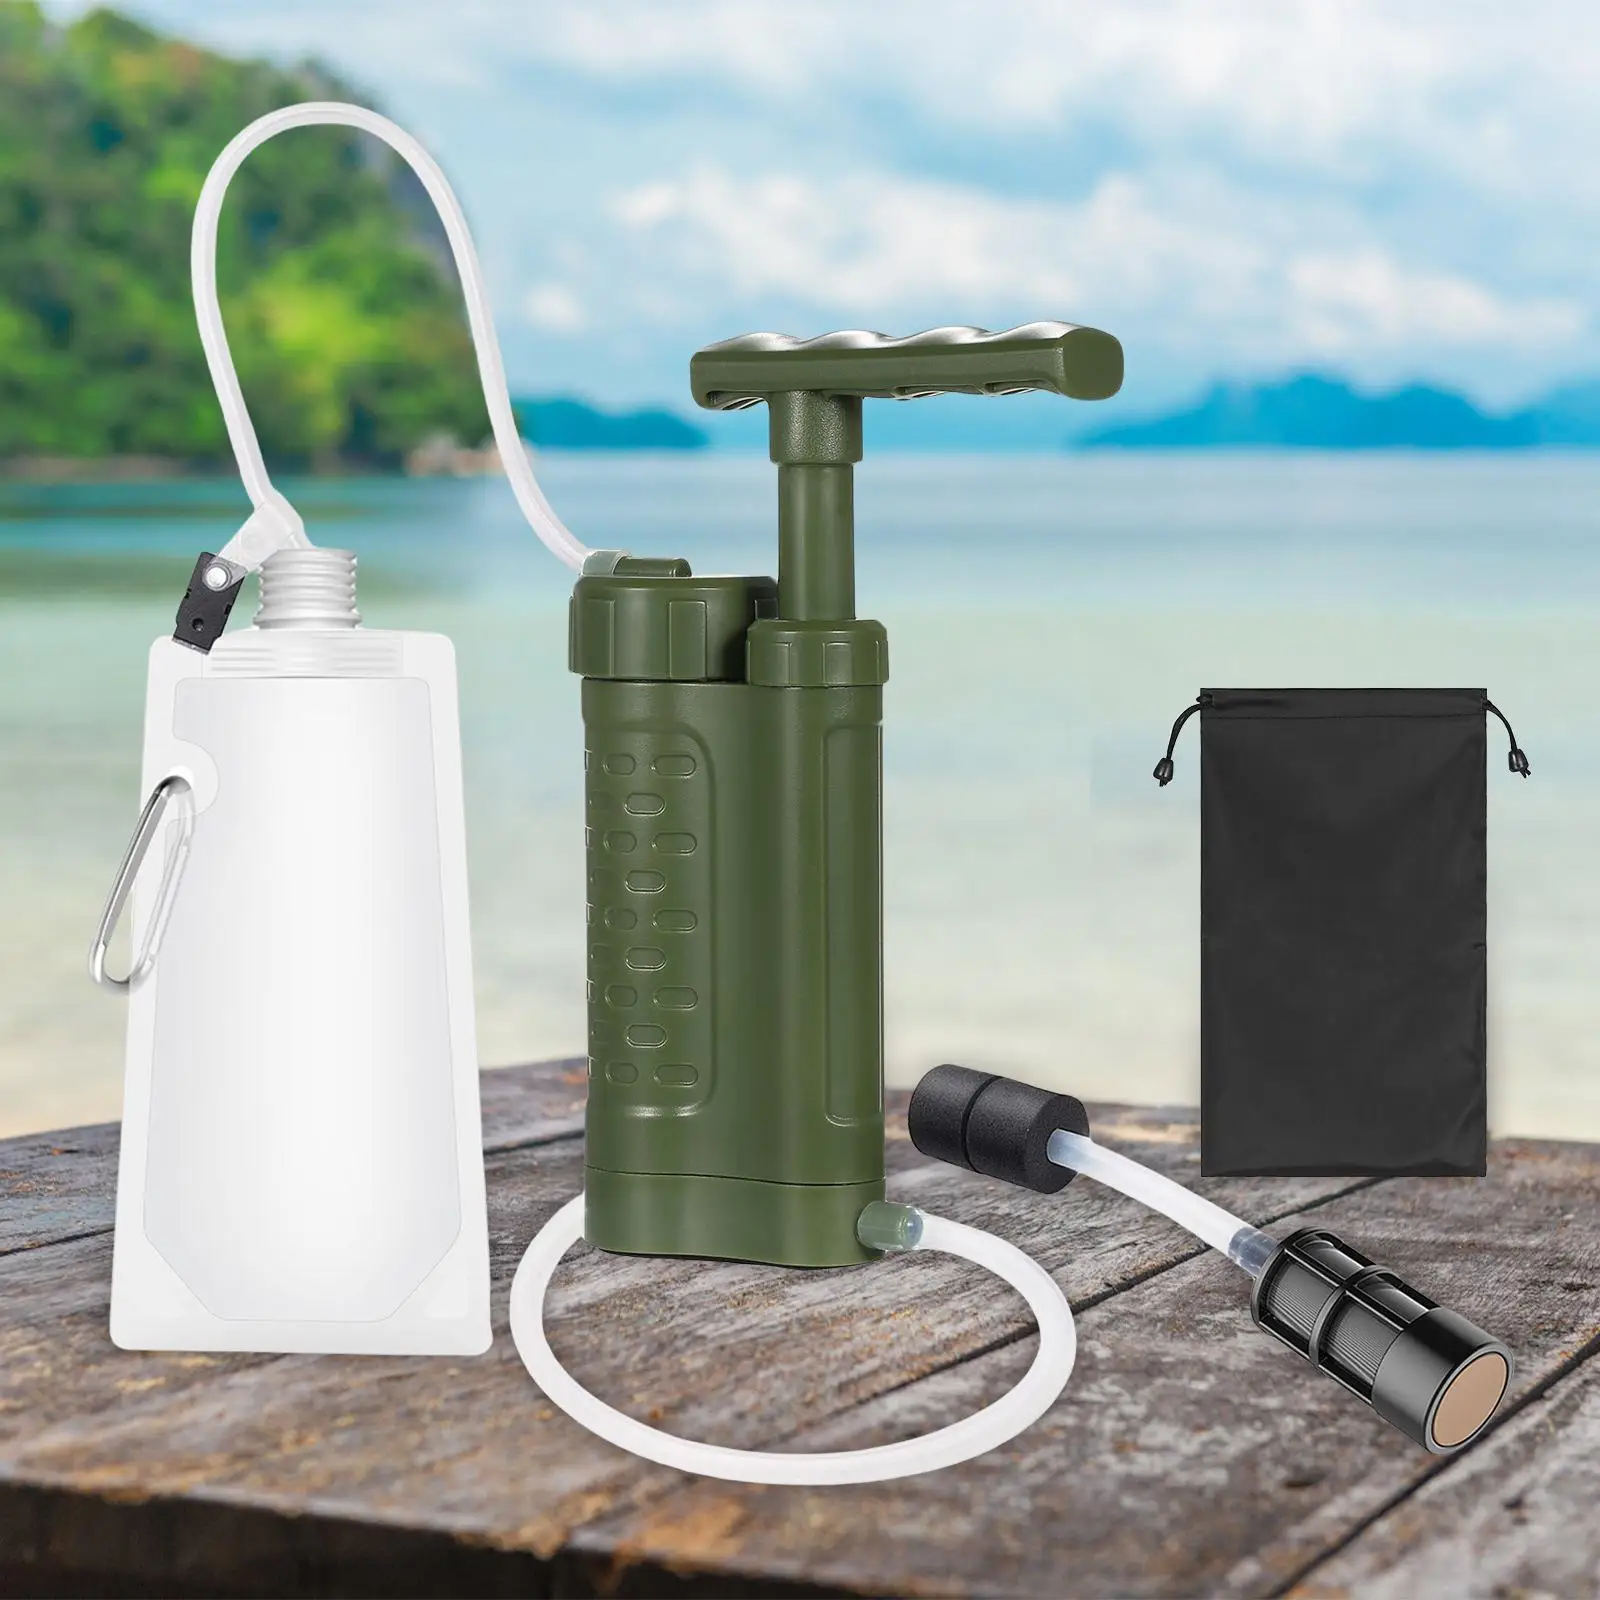 Outdoor Water Purifier Pump Filtration System Emergency Survival Gear 1,200ml/Min Water Filter Straw Filter Pump for Backpacking